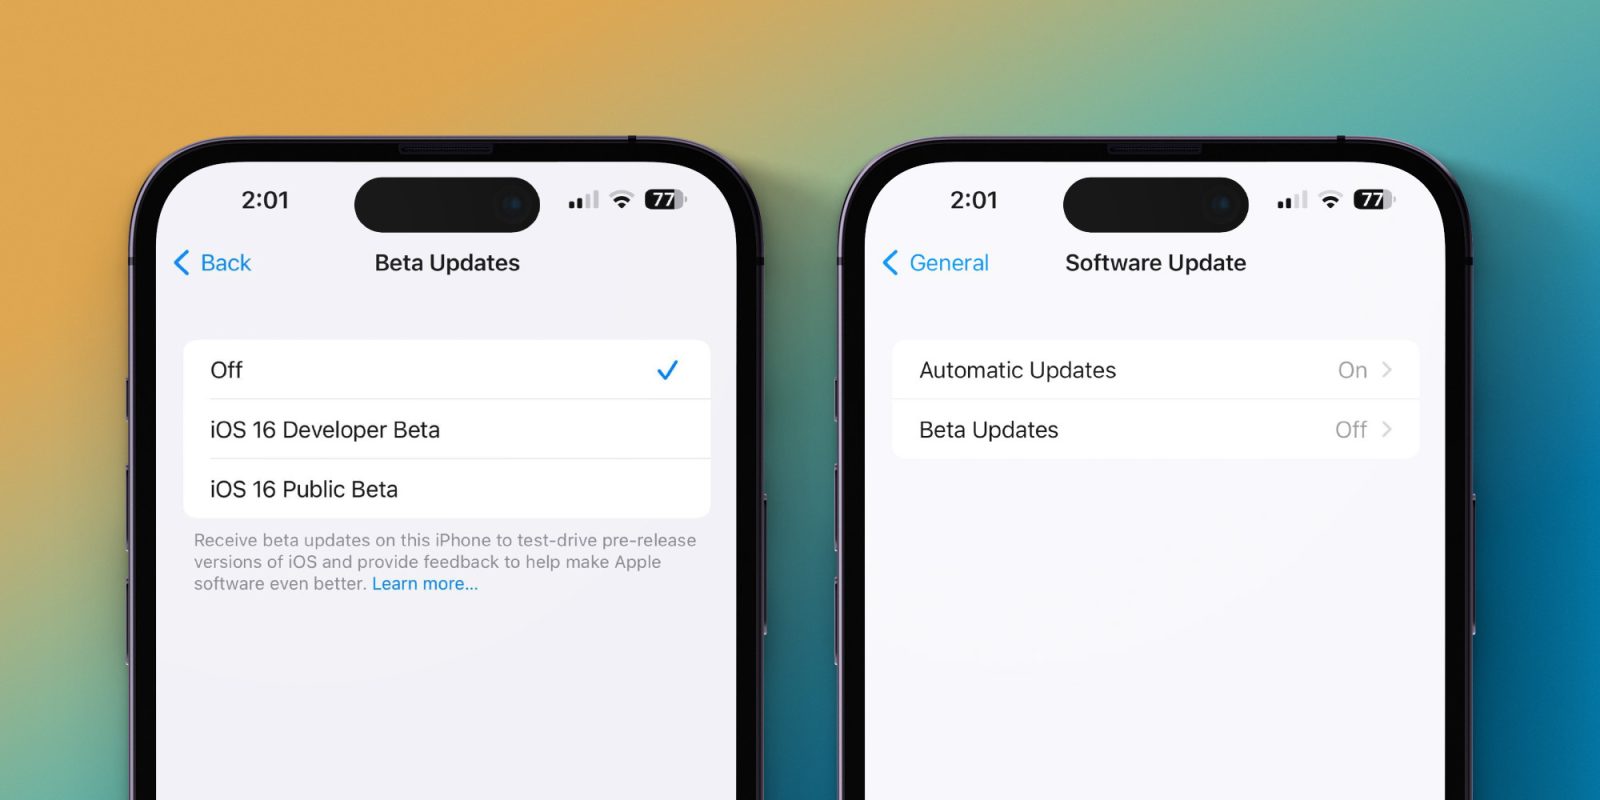 Apple is making it easier for registered developers to install iOS betas, but eliminating profile sharing